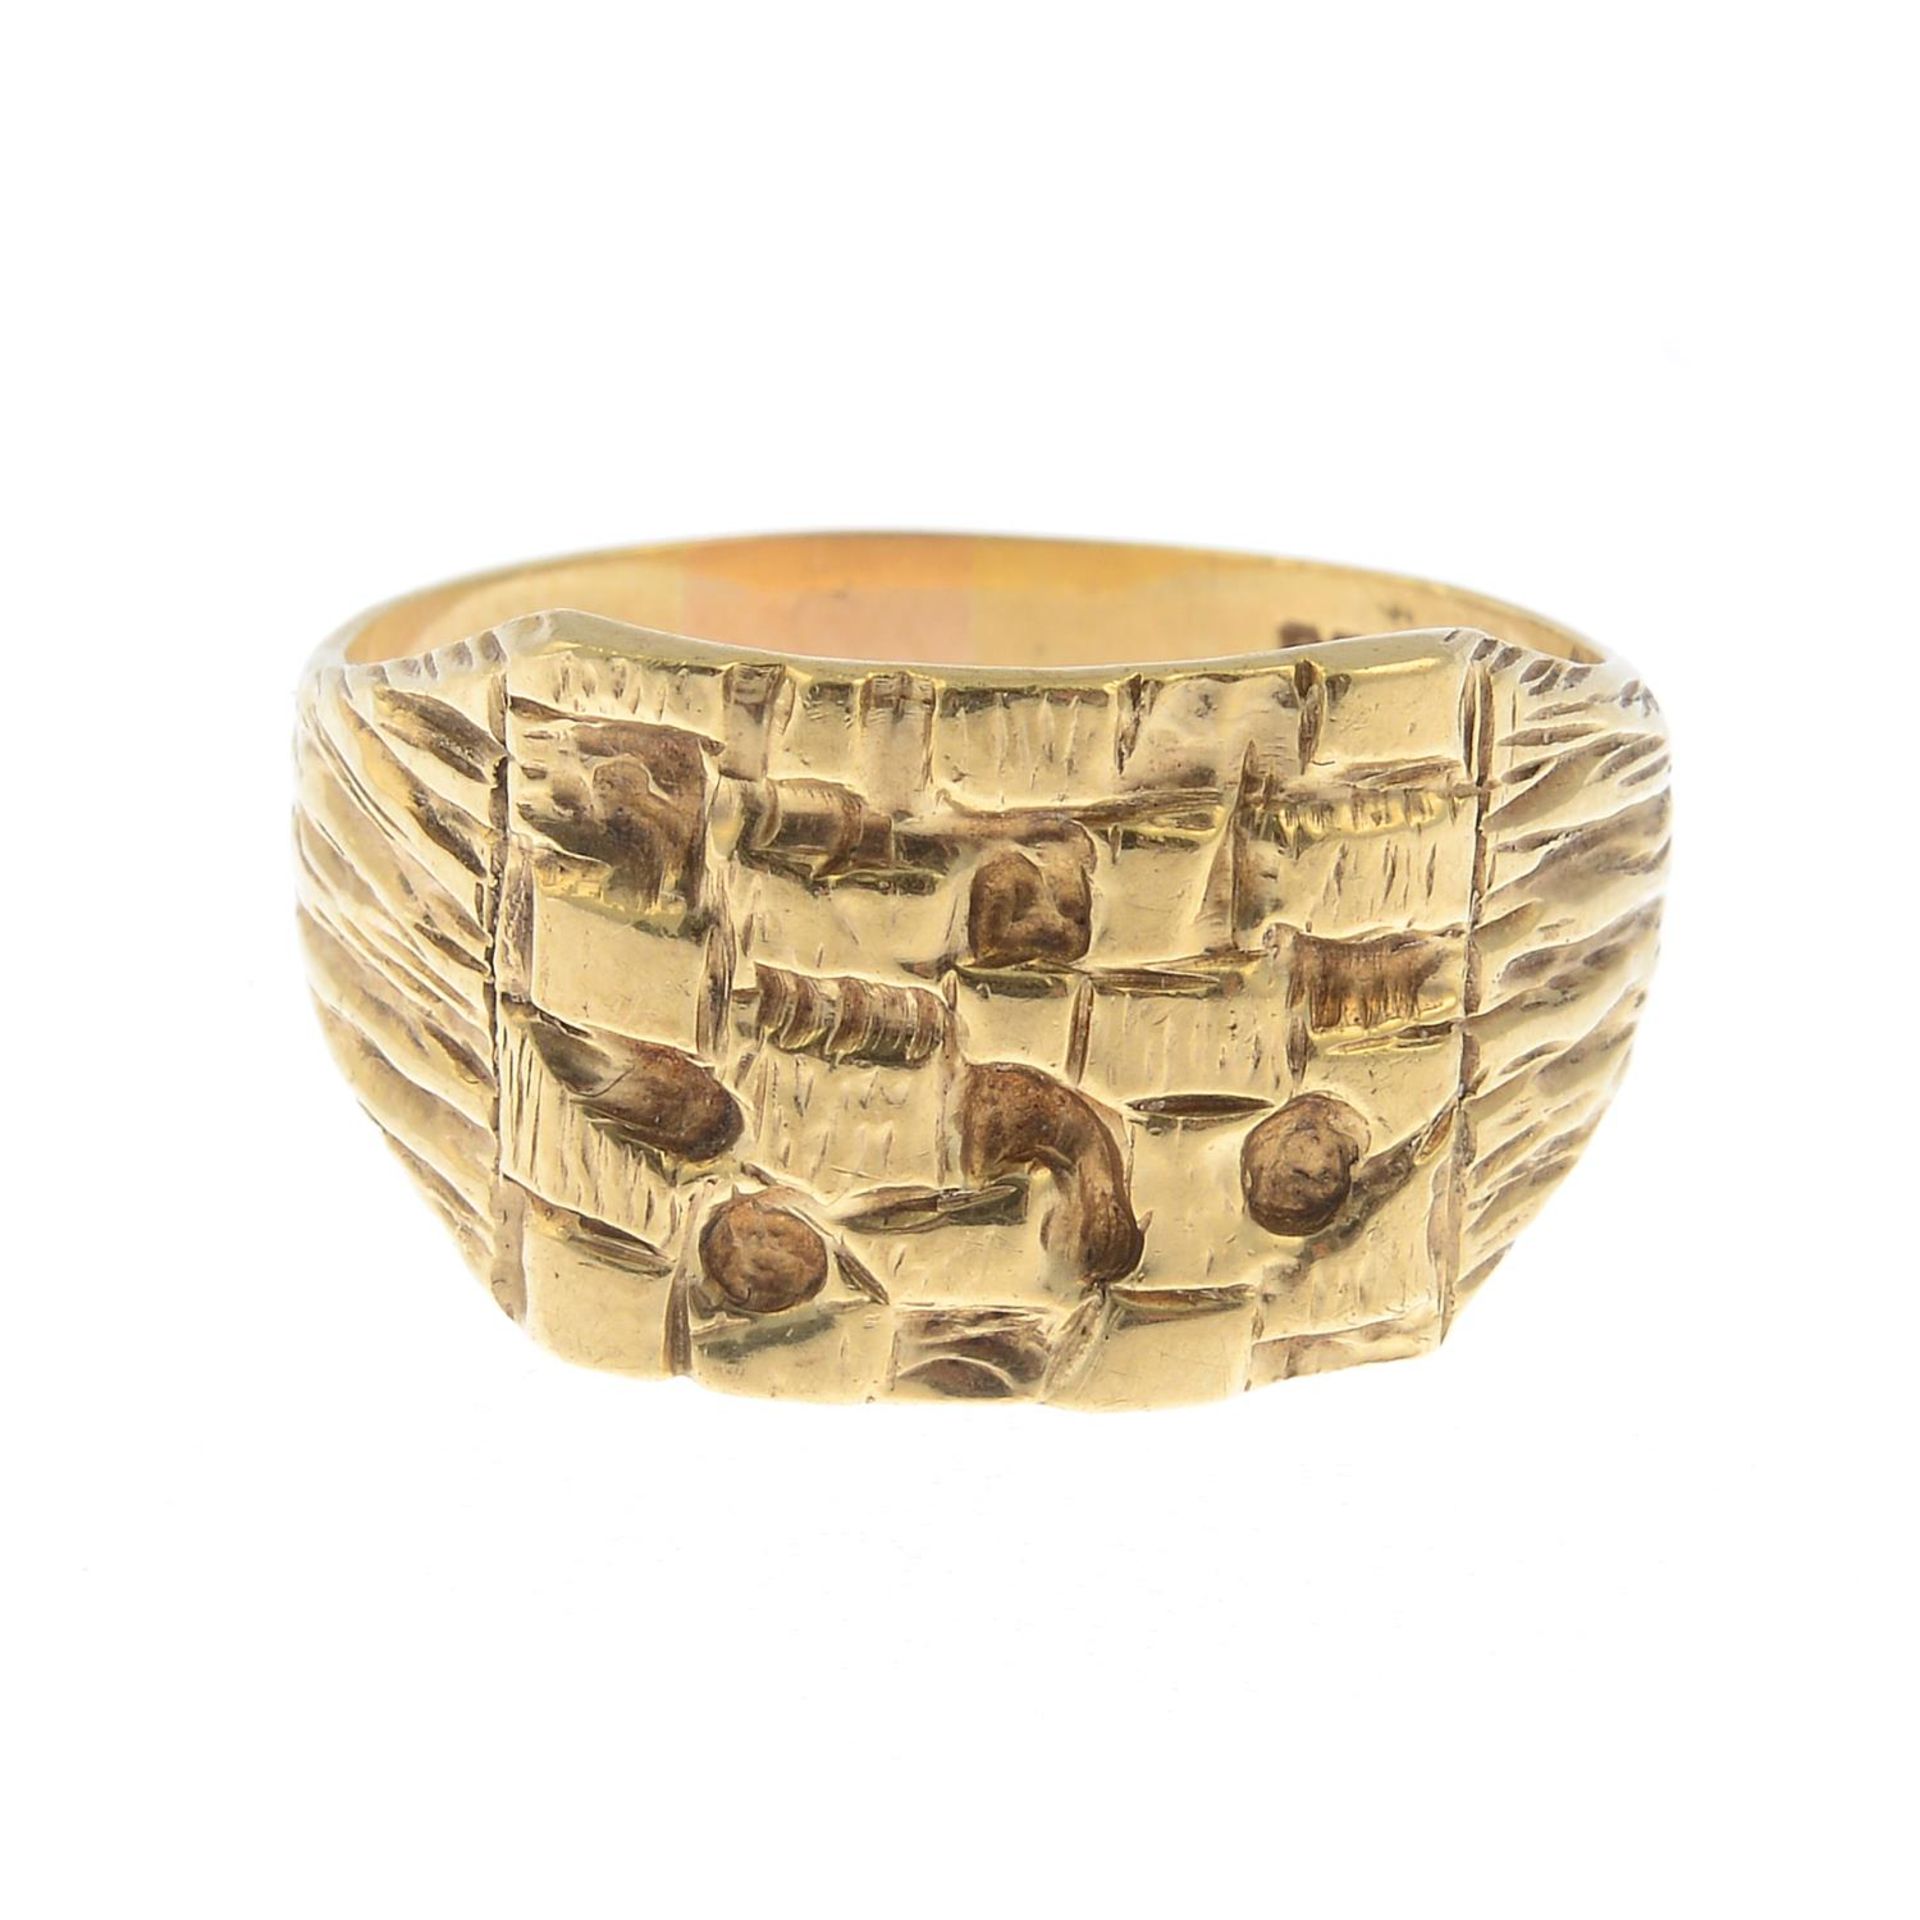 A gentleman's 9ct gold ring, with textured detail.Hallmarks for 9ct gold.